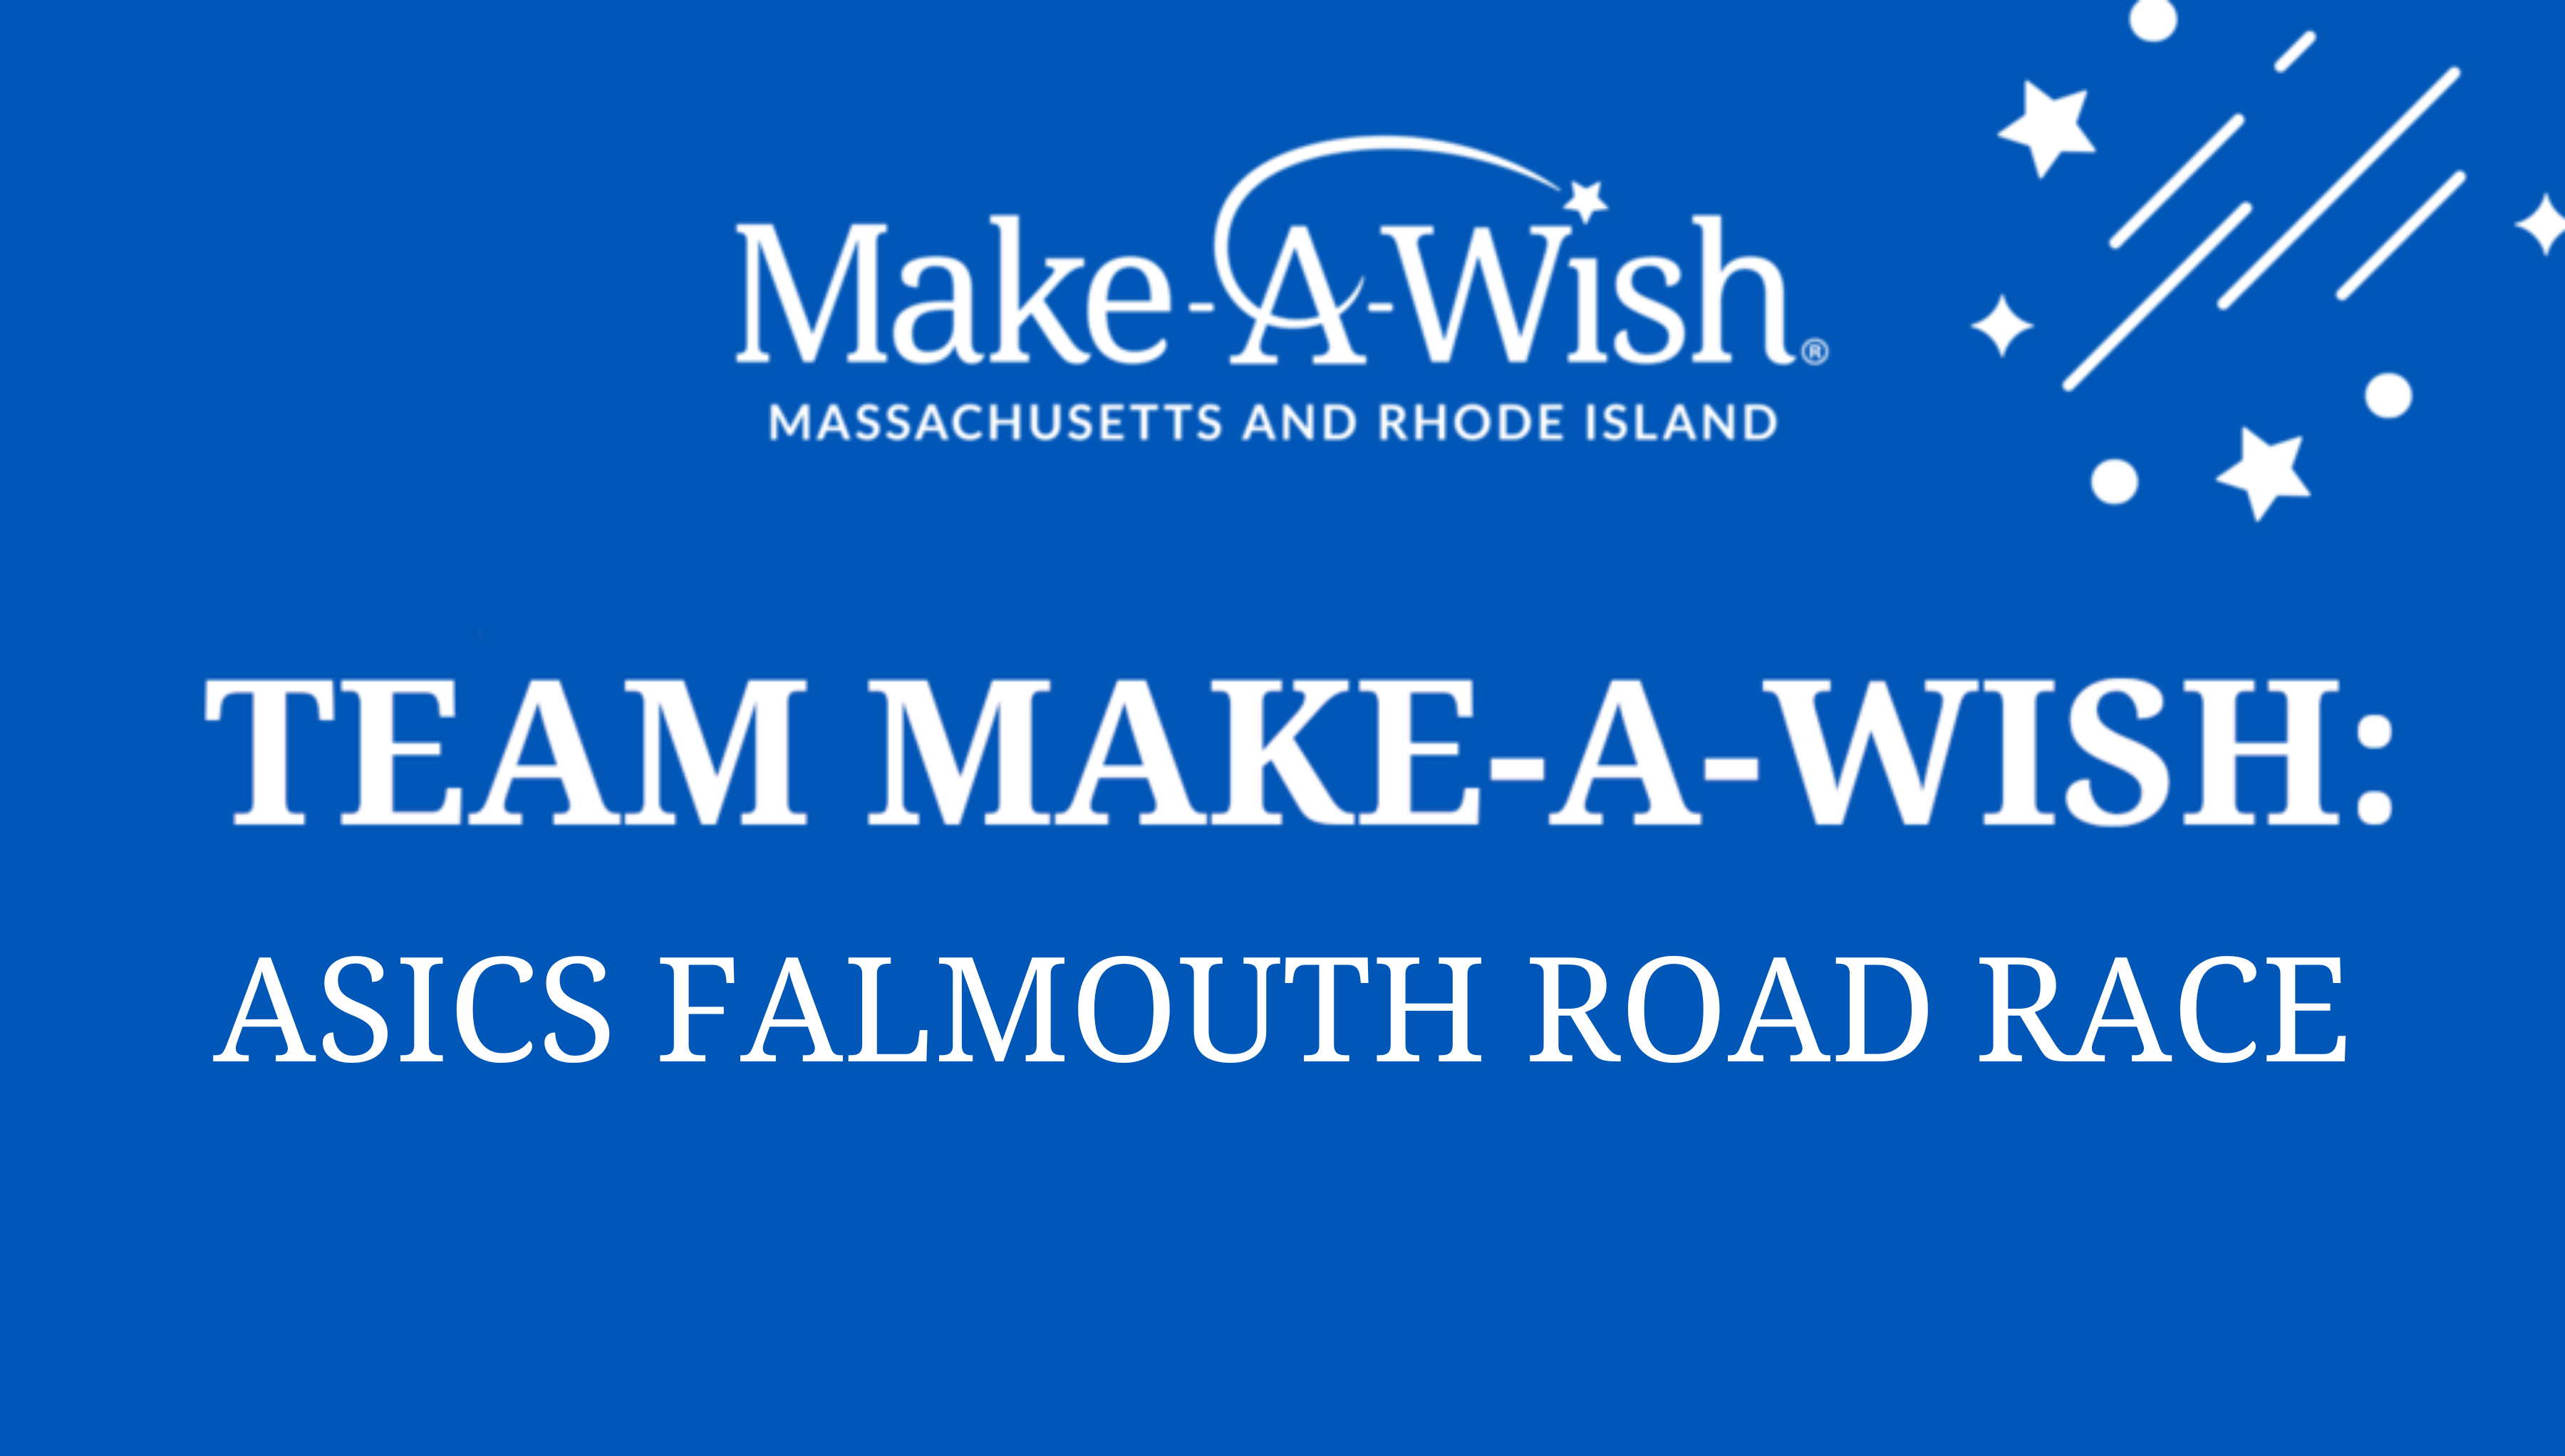 Run for a Charity Team - Falmouth Road Race